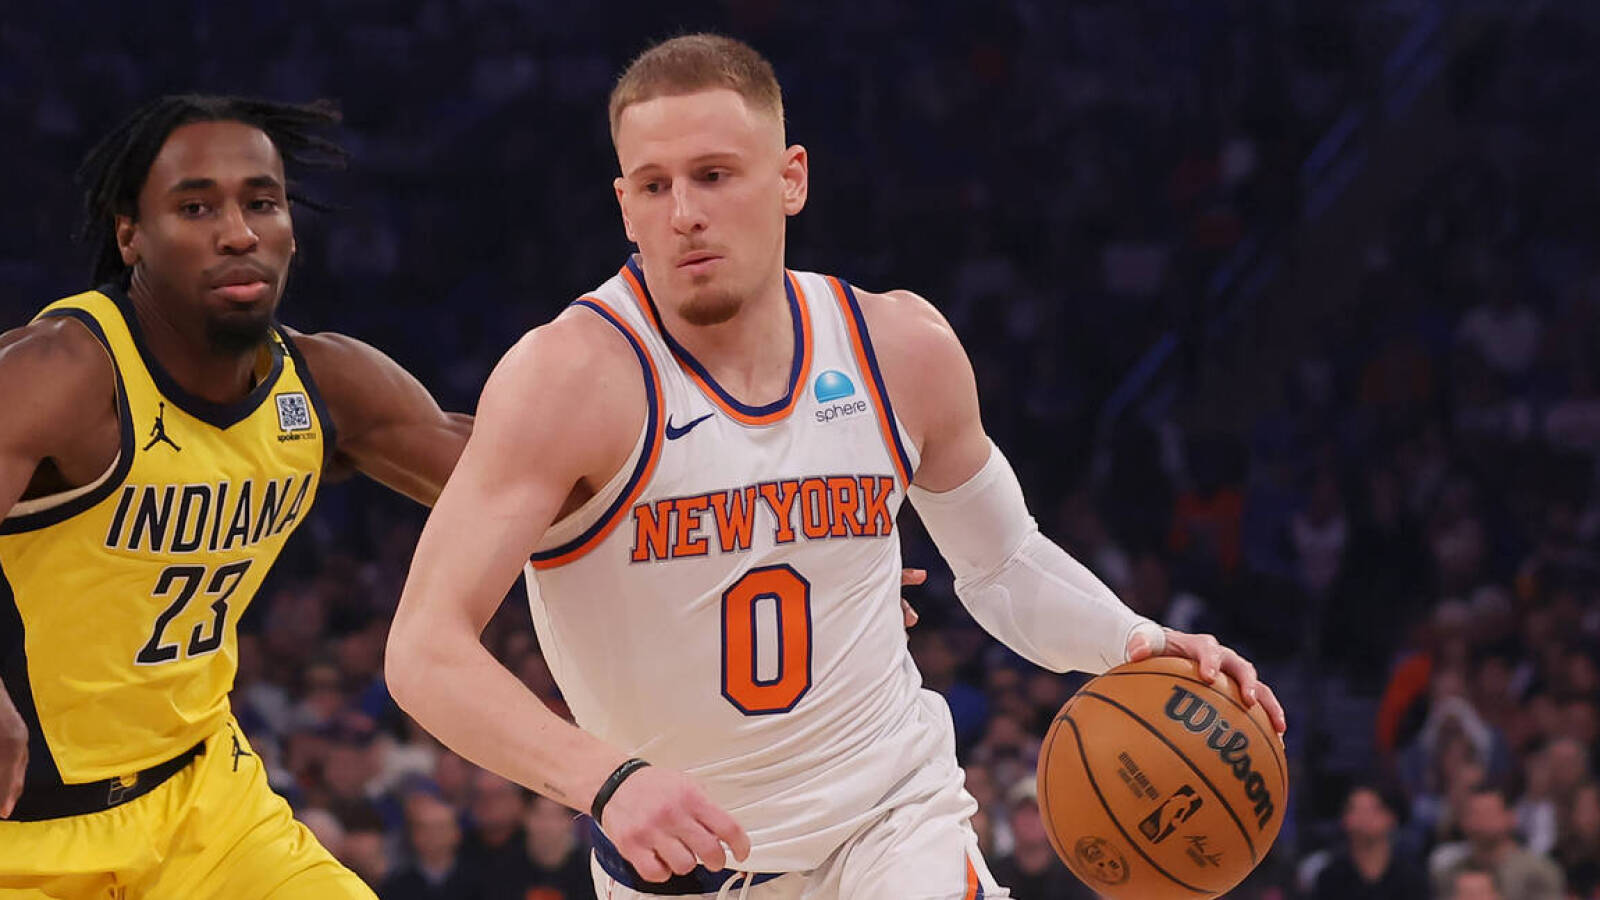 Watch: Knicks' Donte DiVincenzo makes, absorbs big shot to win Game 1